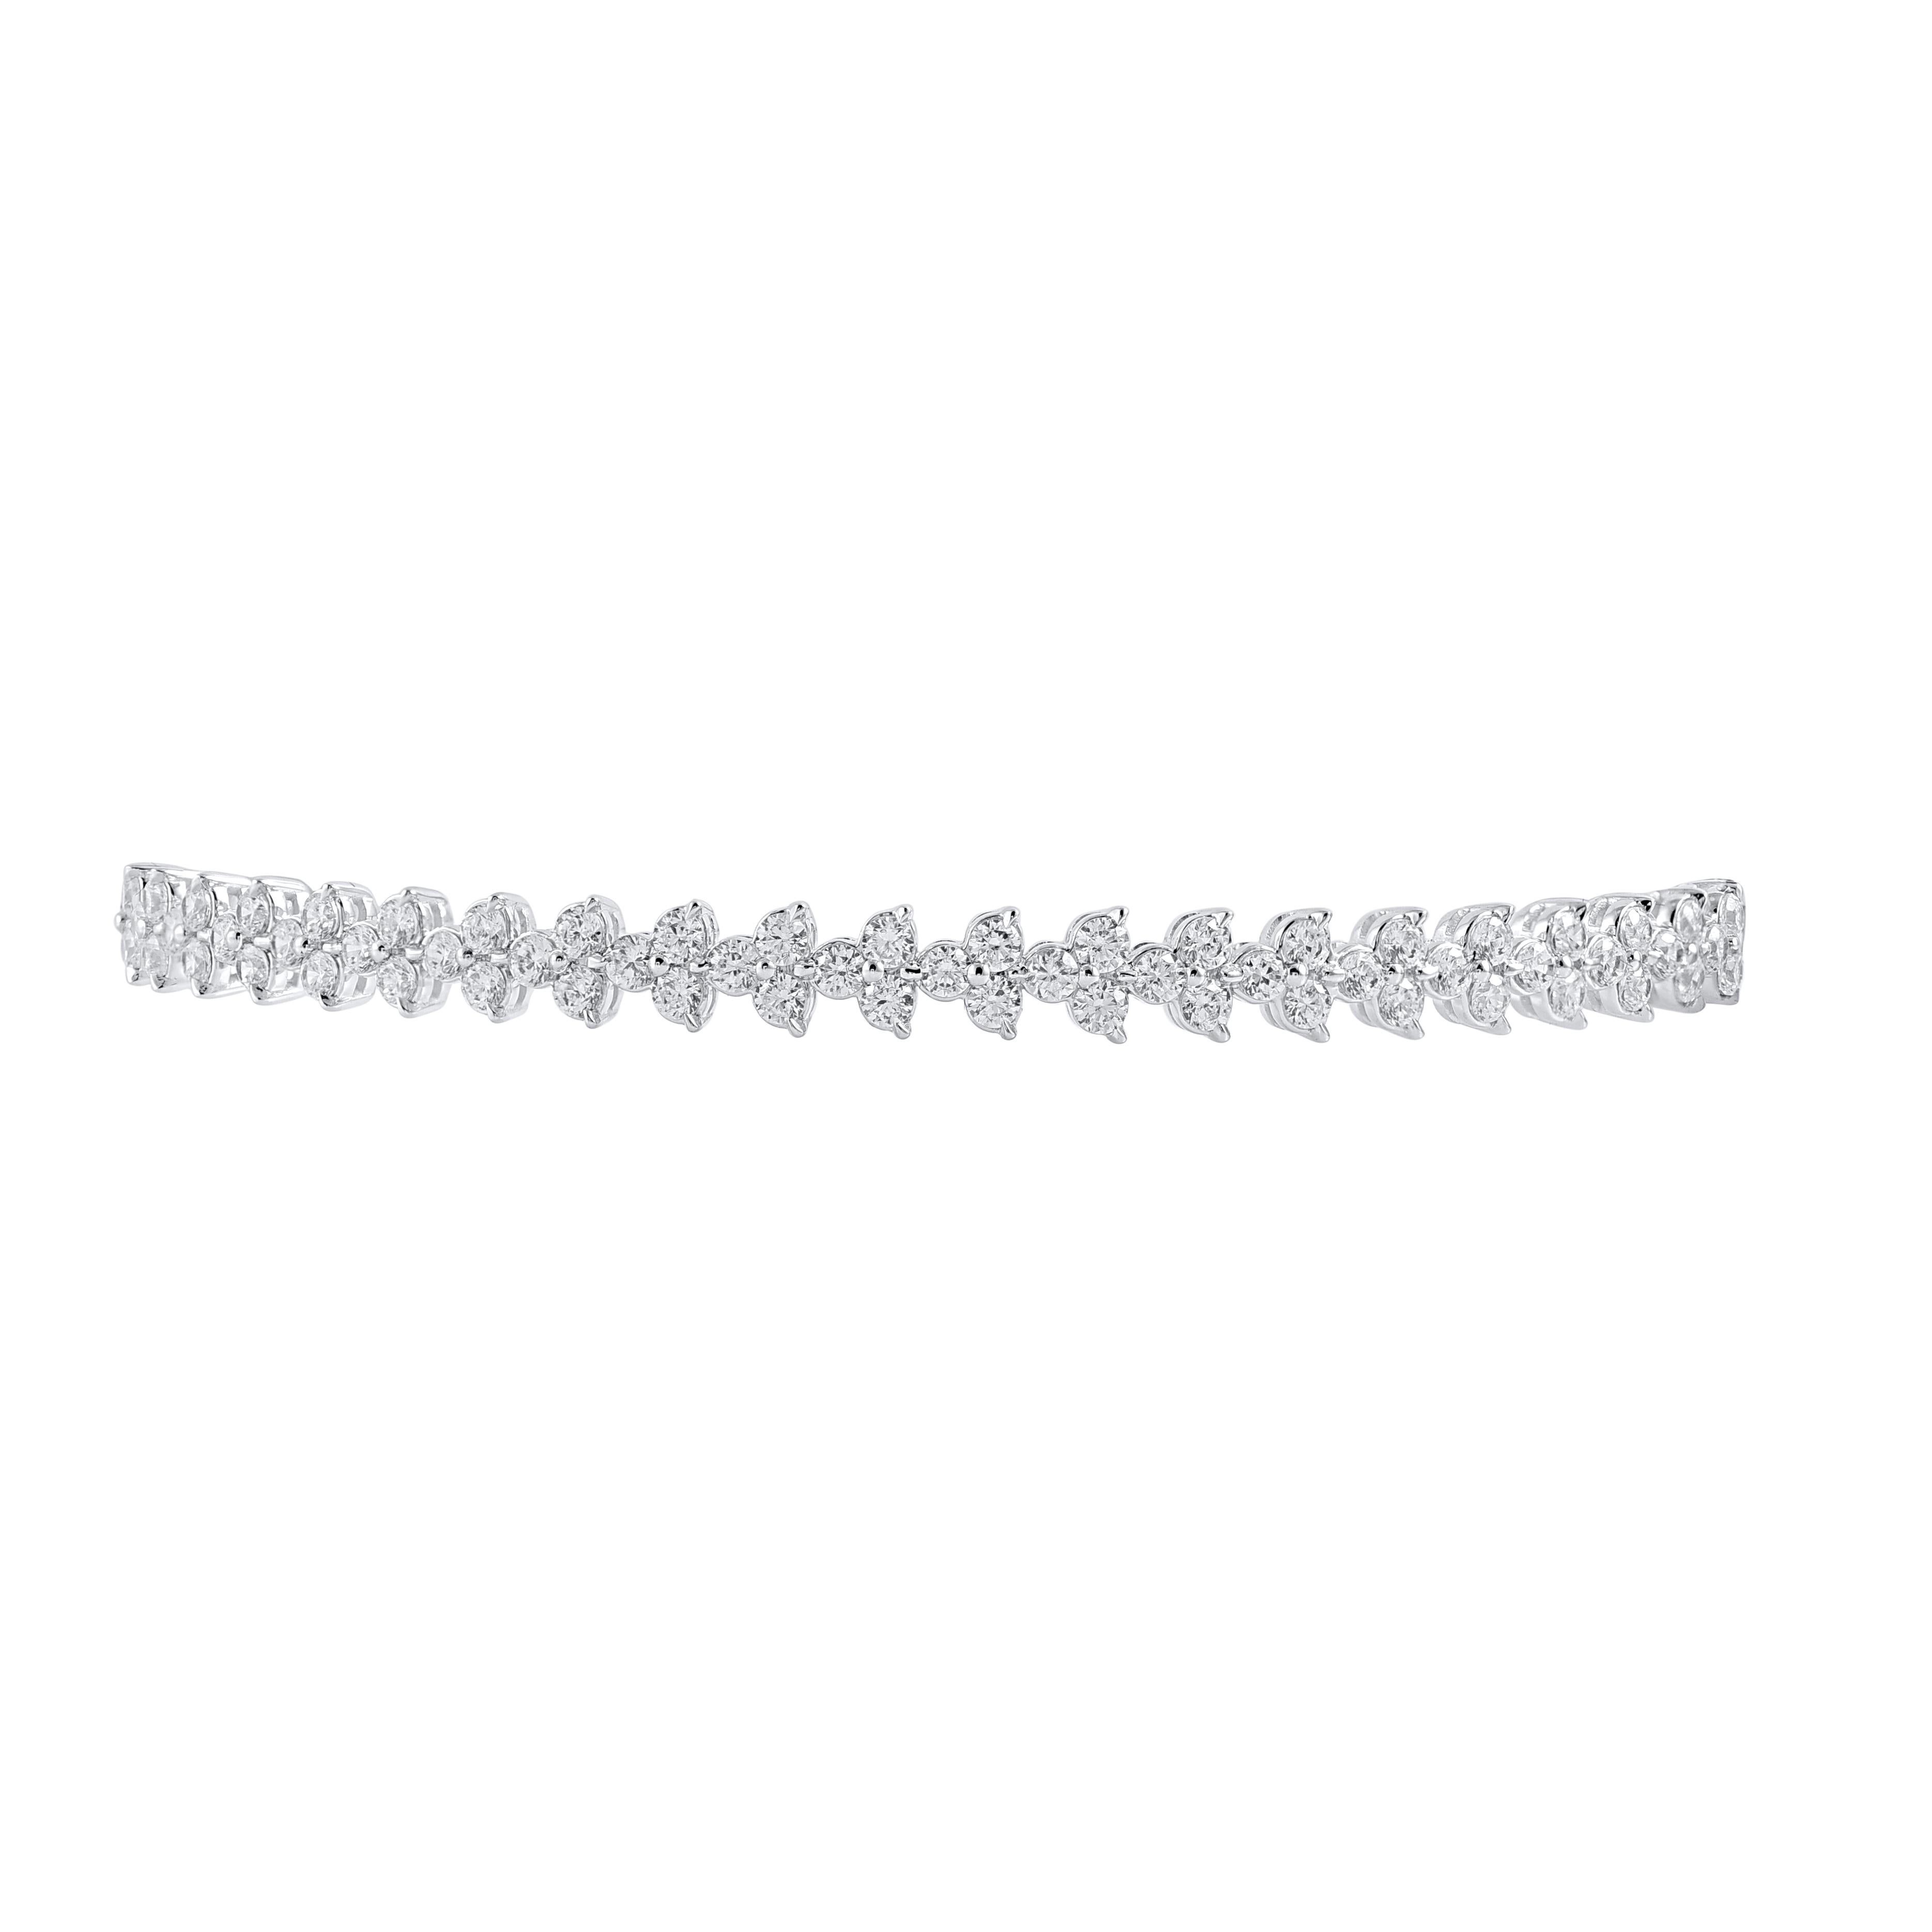 Achieve a most elegant look with the enchanting diamond bangle bracelet. This Shimmering bangle bracelet features 63 natural round brilliant cut diamonds in prong setting and crafted in 18kt white gold. Diamonds are graded H-I color, I-2 clarity. 

